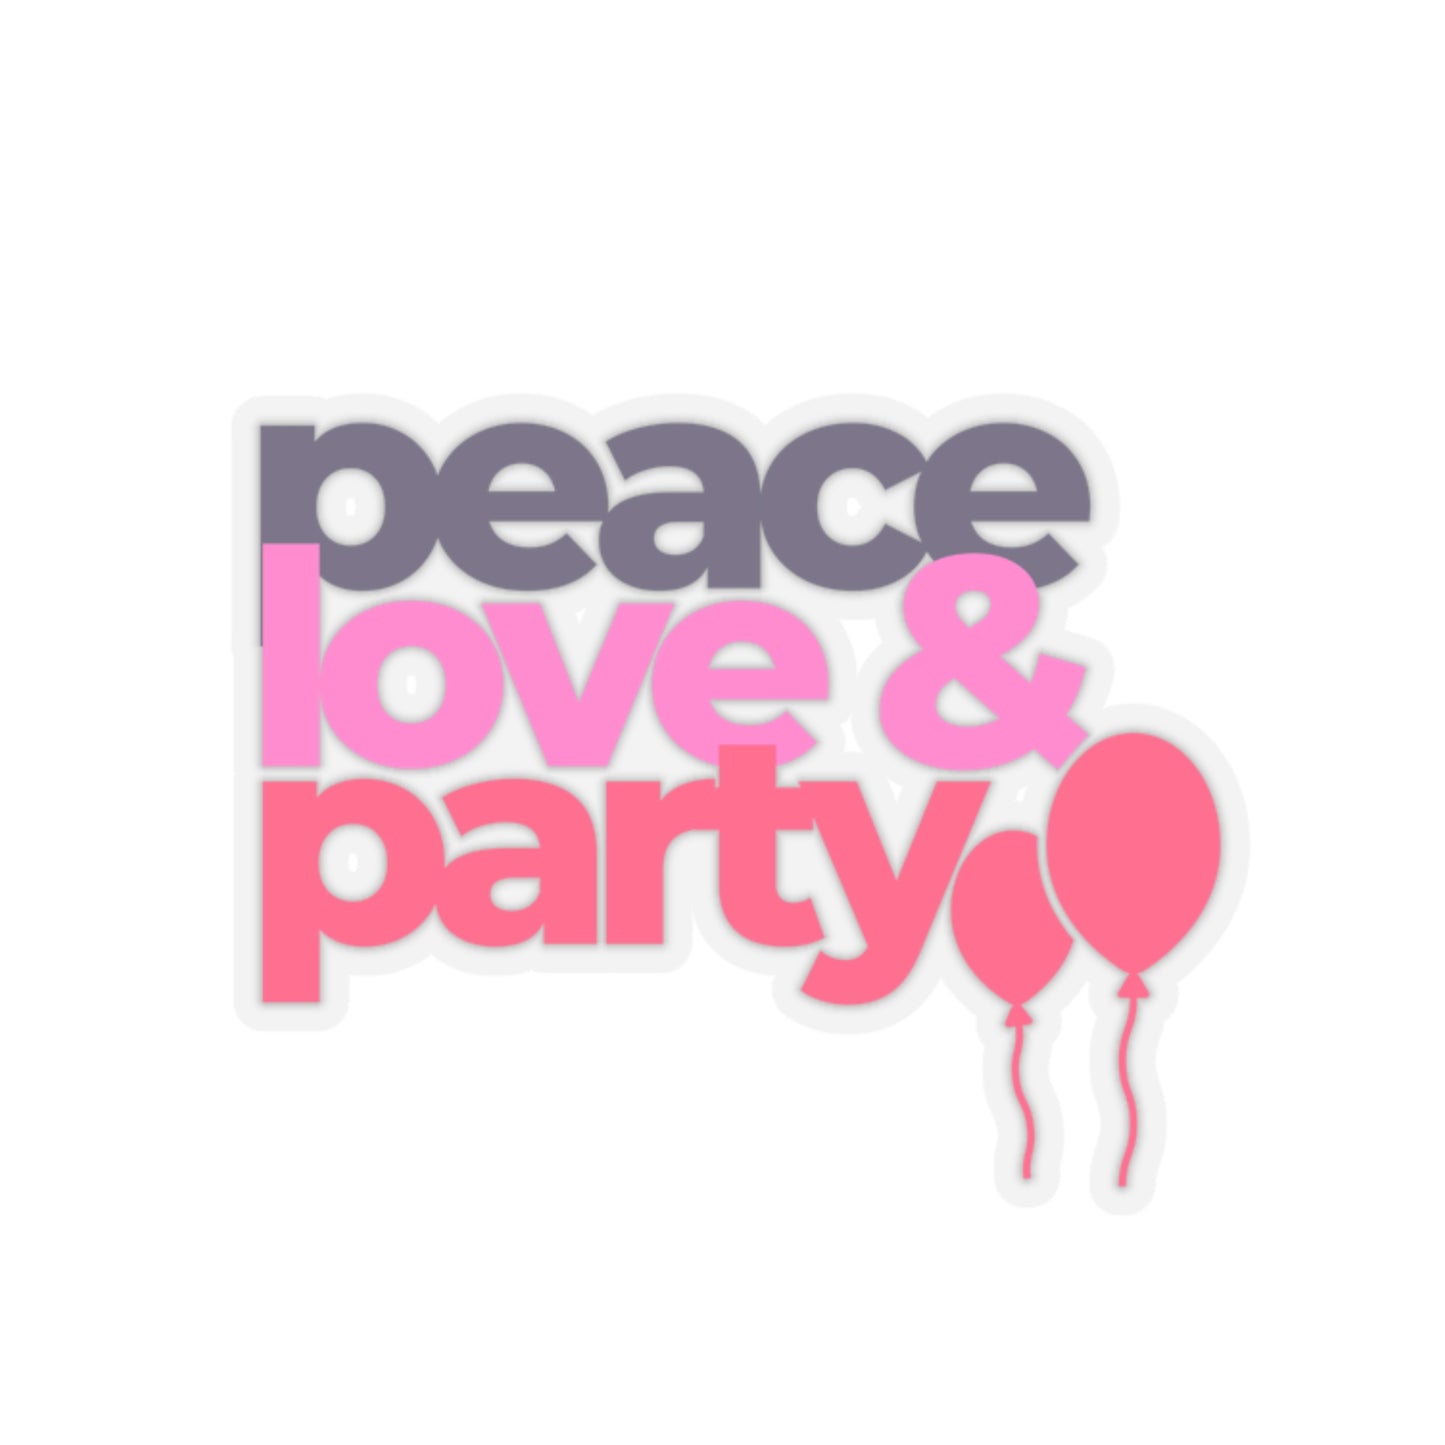 Peace, Love, Party! - Sticker